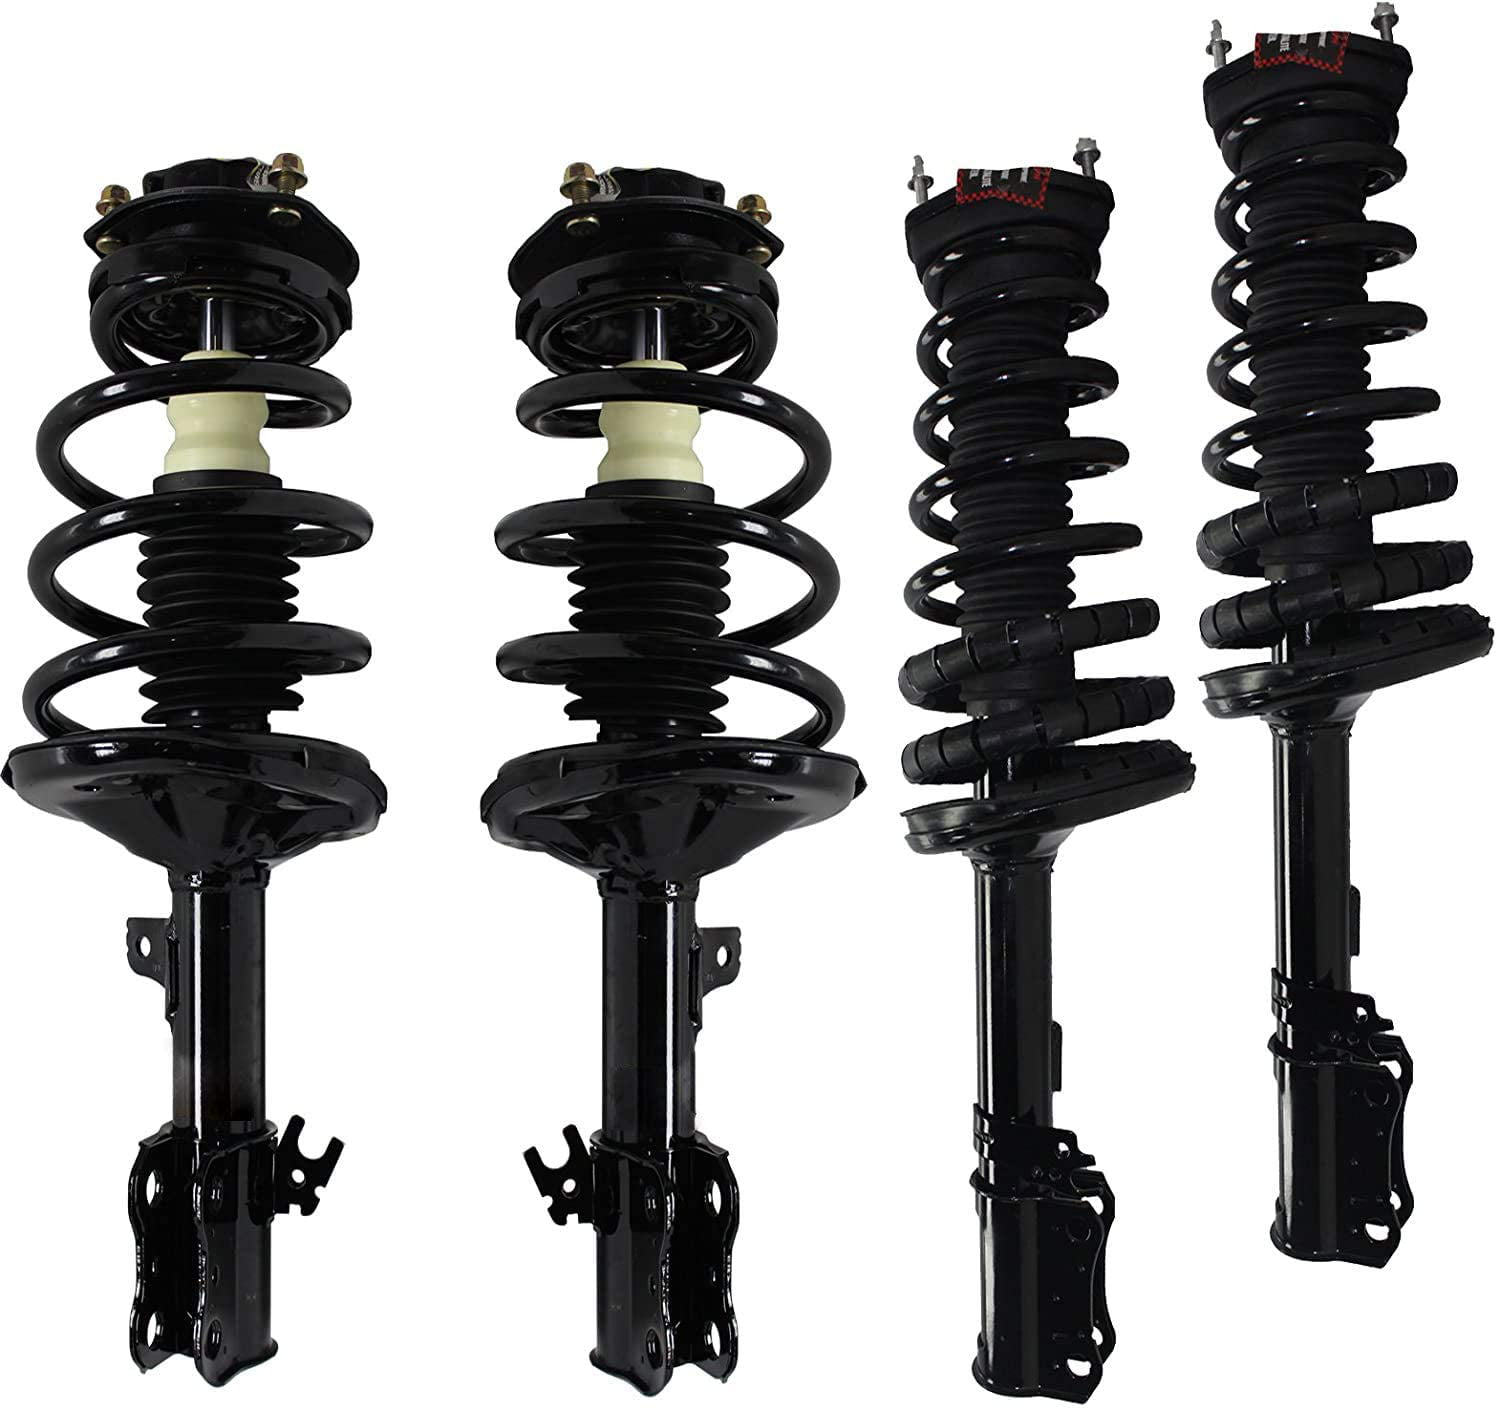 Shocks and Struts,ECCPP Front Pair Shock Absorbers Strut Kits Compatible with 1997 1998 1999 2000 2001 Lexus ES300/Toyota Camry,1997-2003 Toyota Avalon,1999-2003 Toyota Solara 334245 71678 334246 7167 